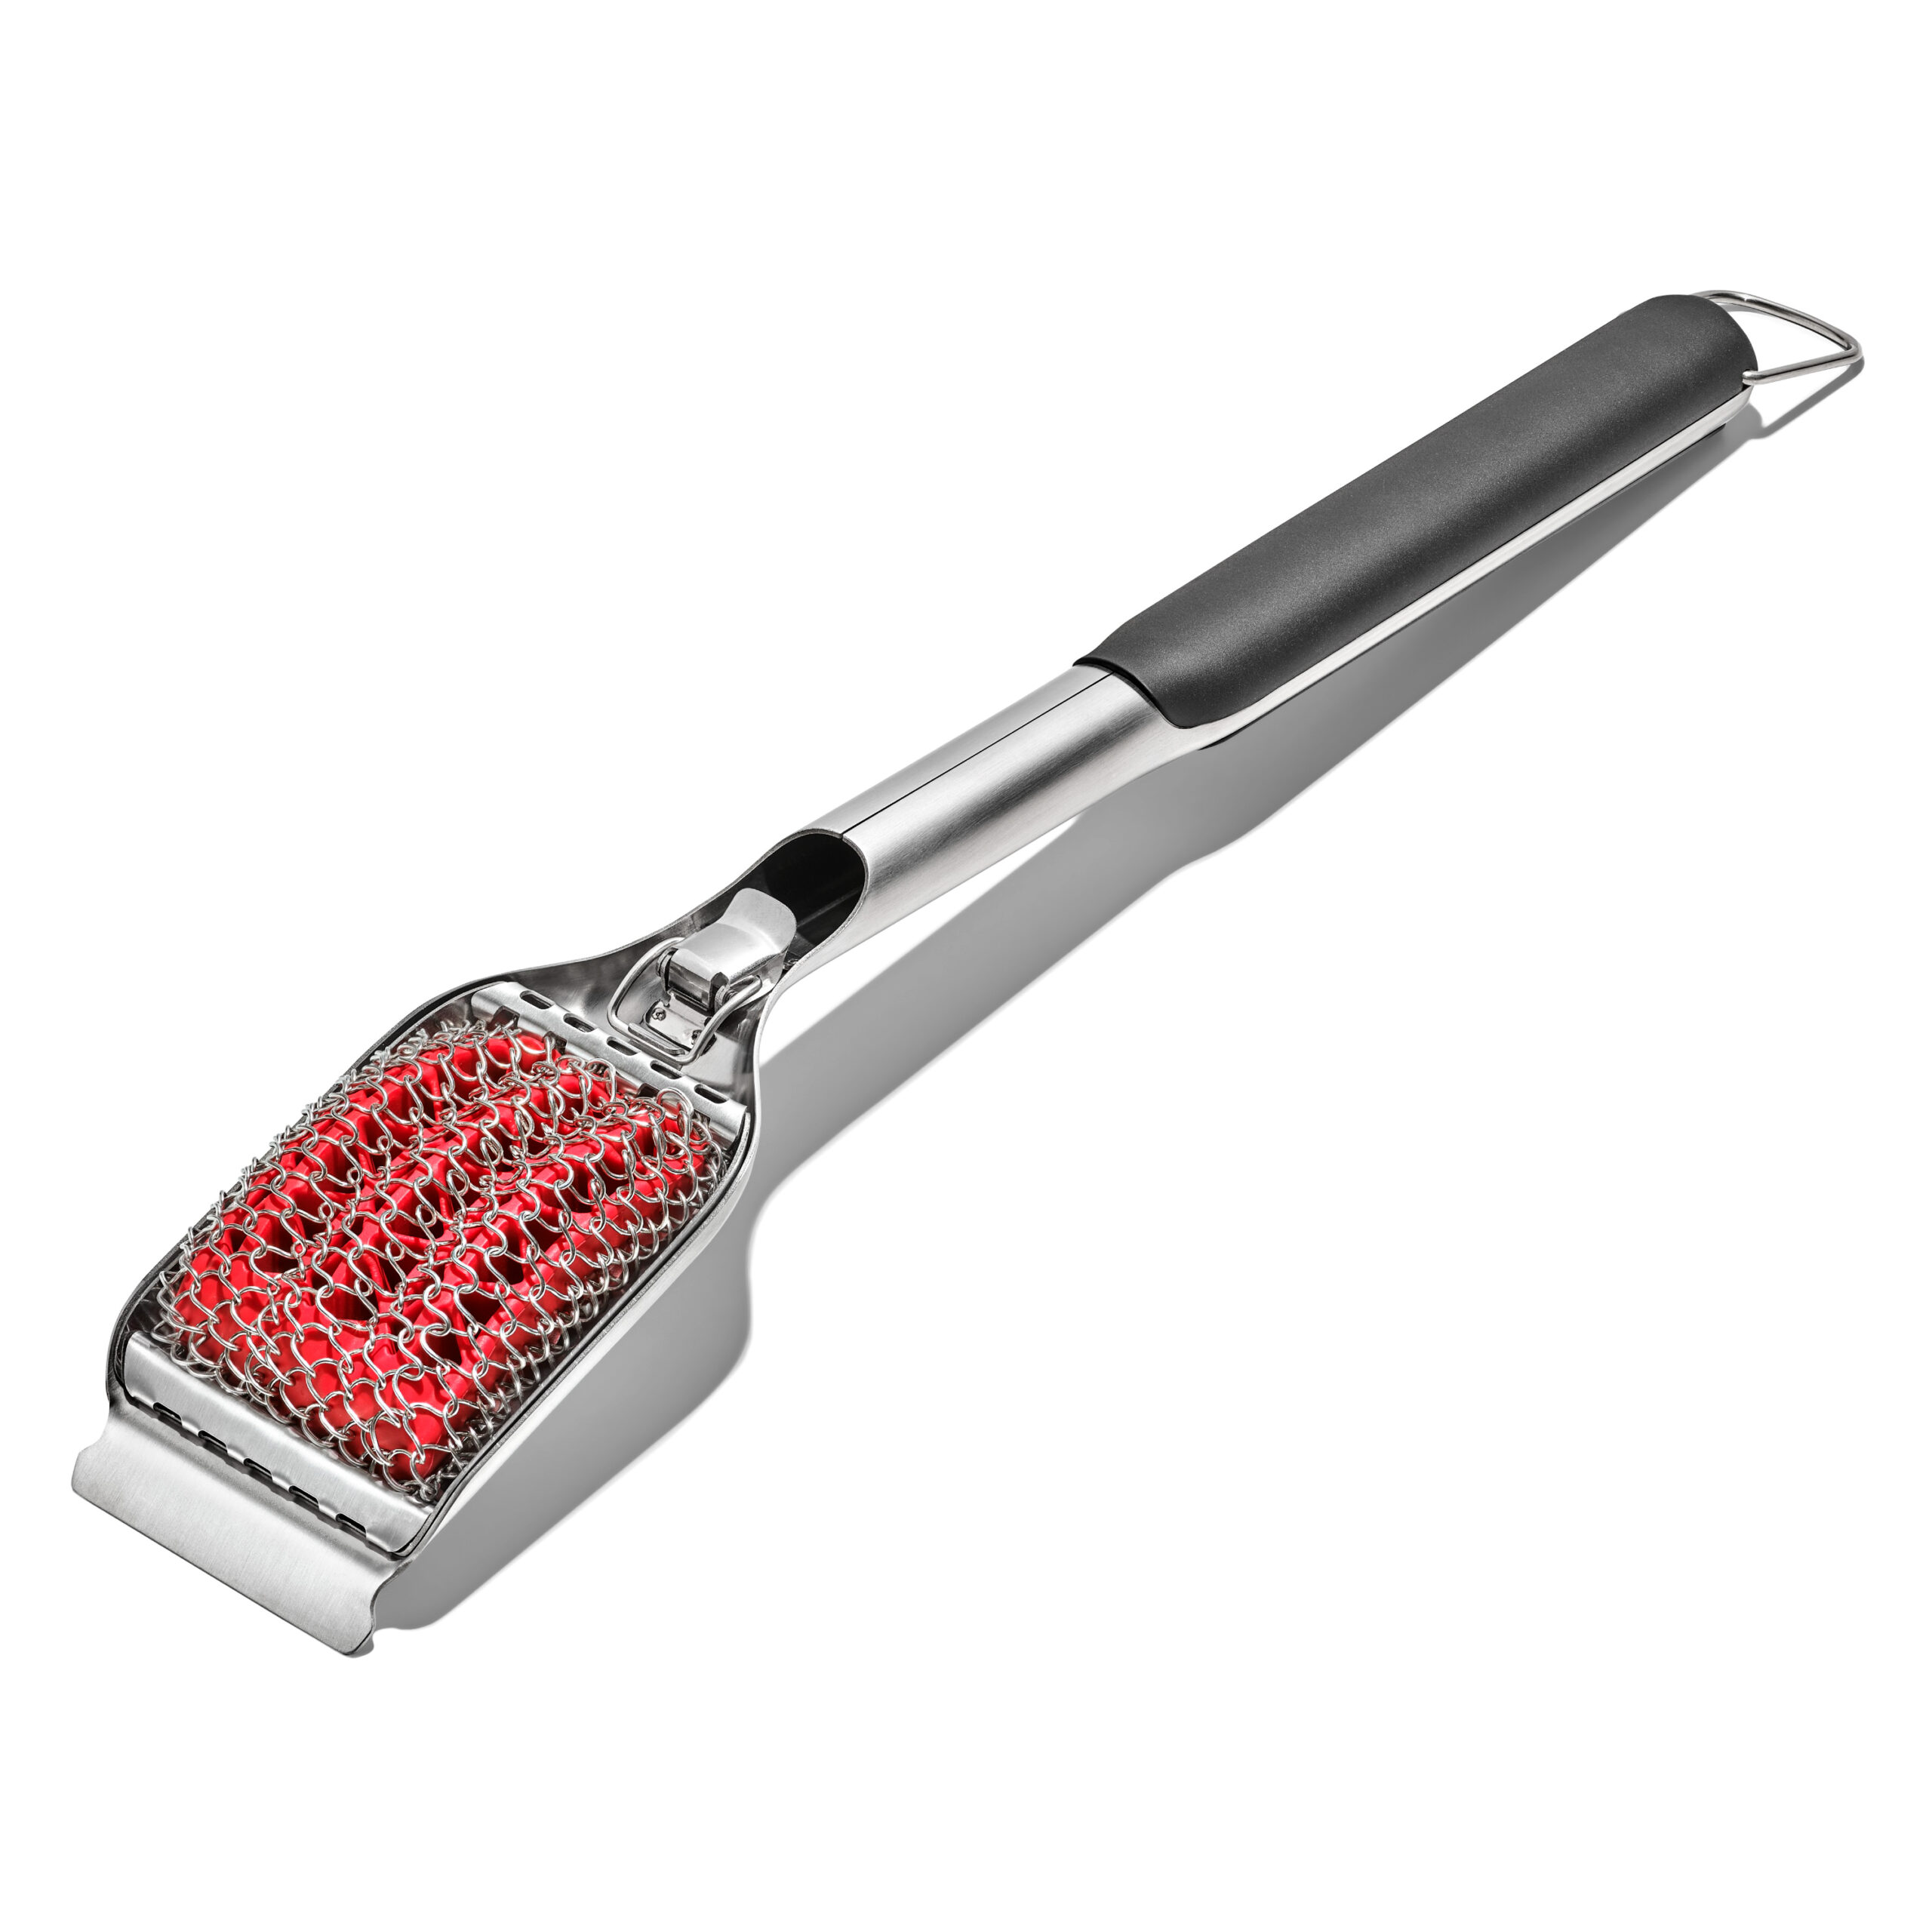 Good Grips Coiled Grill Brush With Replaceable Head, OXO